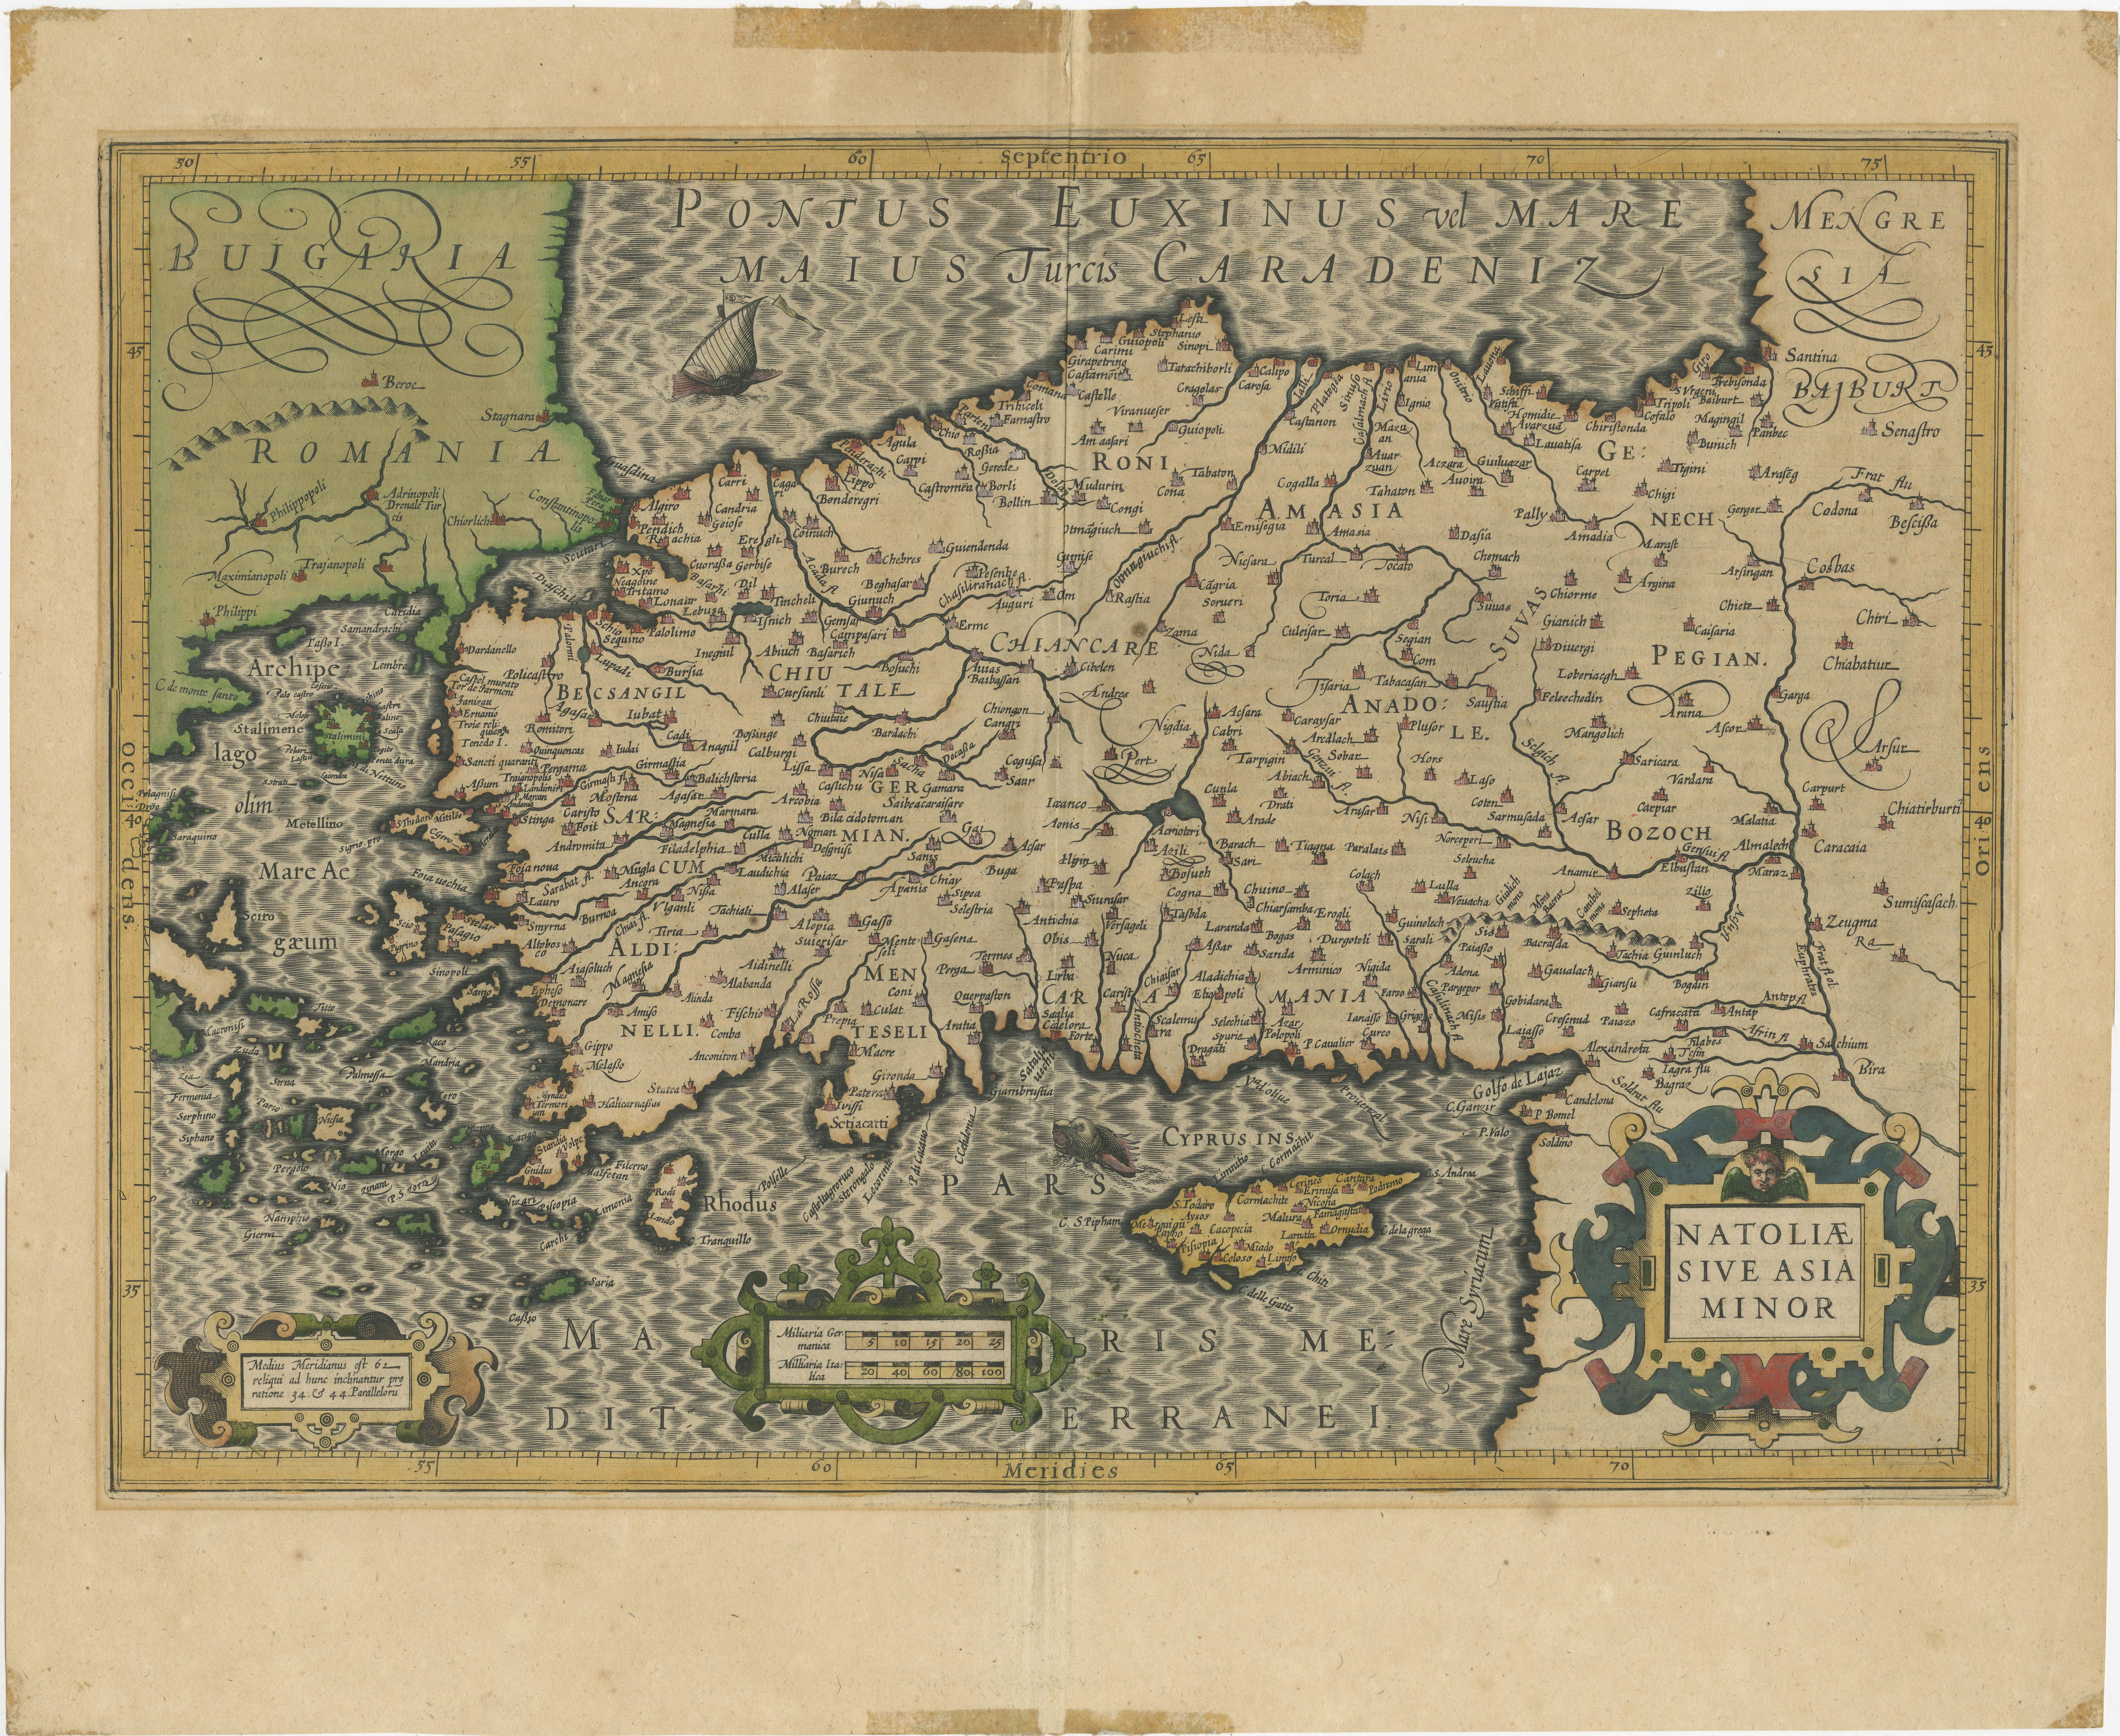 Antique map titled 'Natoliae sive Asia Minor'. Original old map of Turkey, Asia Minor and Cyprus. Includes a decorative cartouches, sailing ship, sea monster and finely stippled seas. By G. Mercator. Published circa 1620.